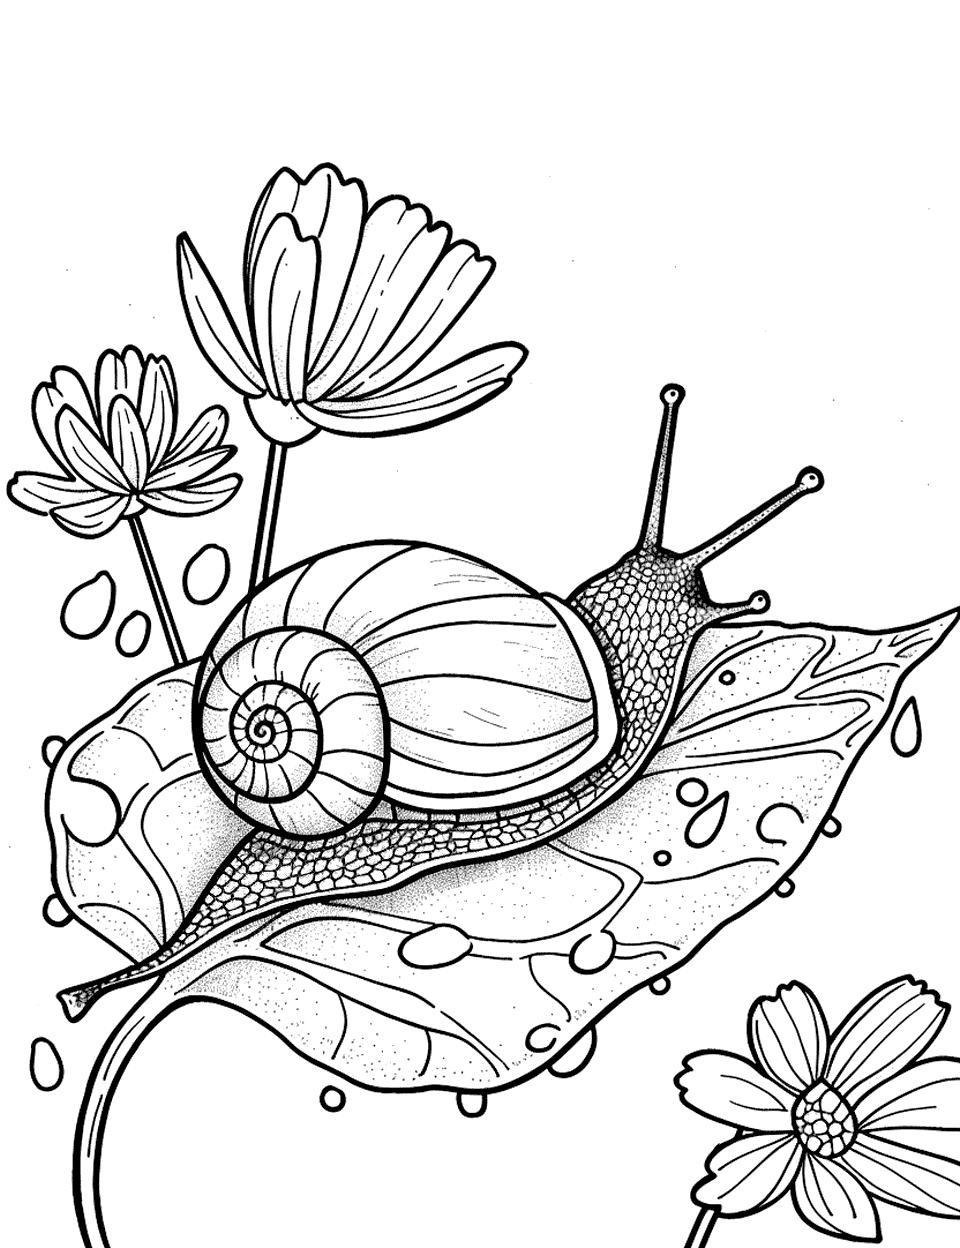 Snail Crawling on a Leaf Garden Coloring Page - A snail slowly making its way across a large, dew-covered leaf.